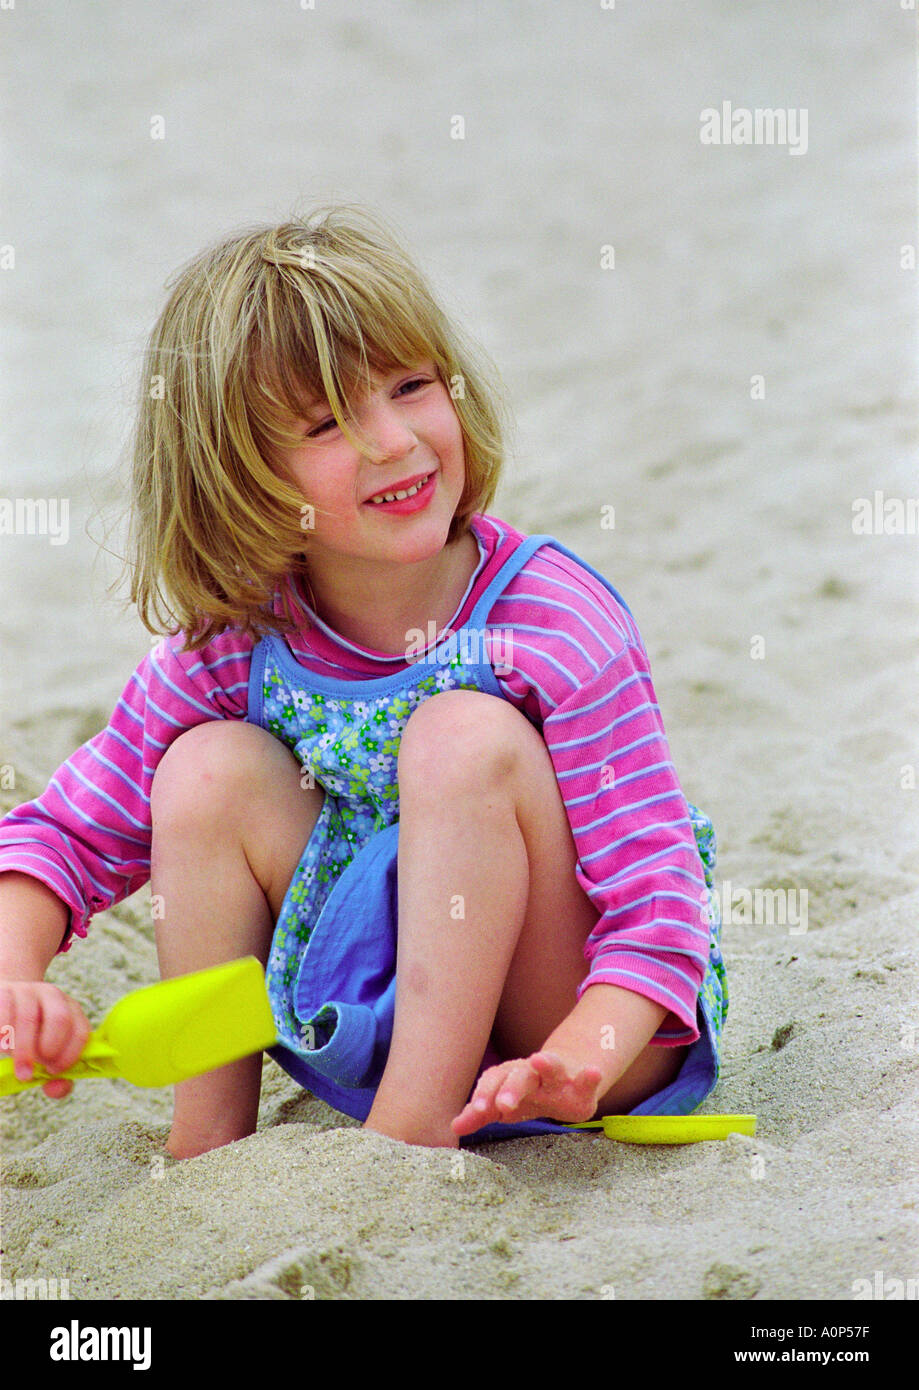 colourful image of child, smiling and playing in the sand at the beach Stock Photo